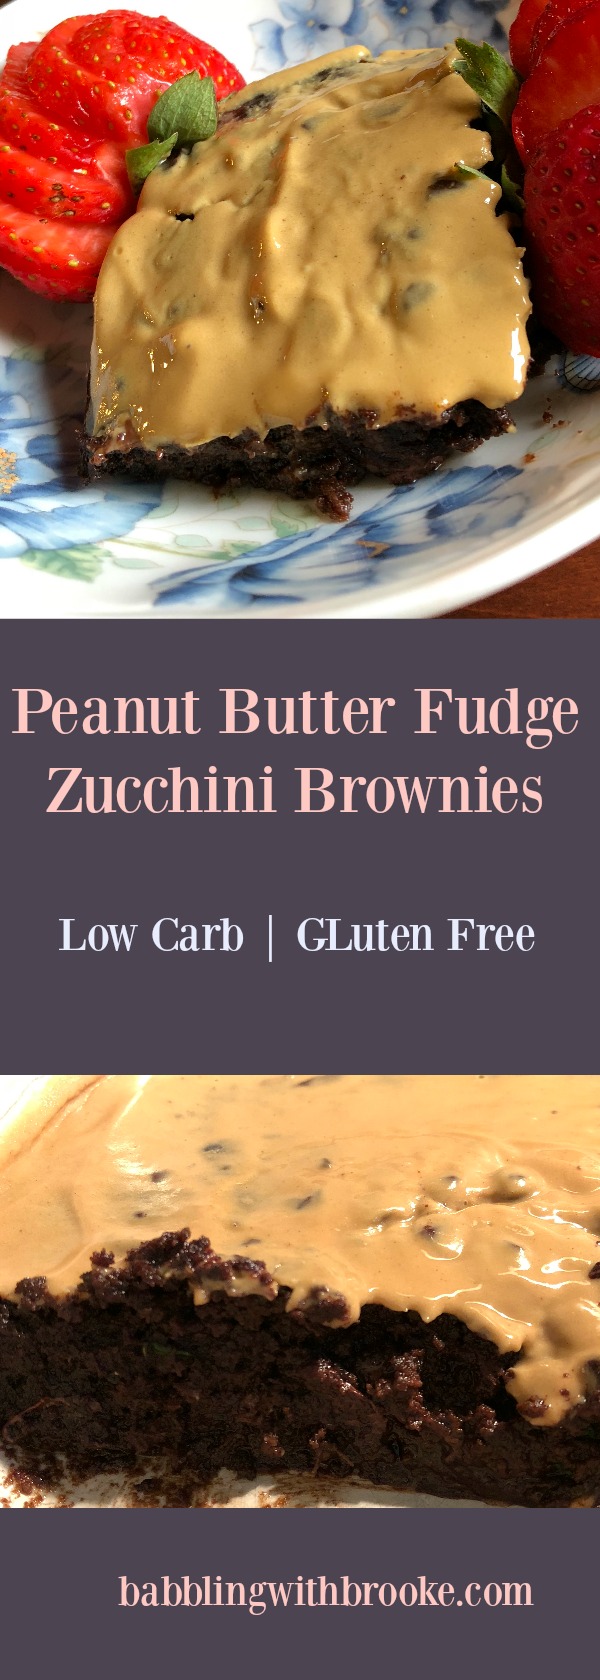 A delicious keto dessert recipe that is guaranteed to be loved by everyone! These brownies are fudgy, moist and chocolatey! #ketobrownies #zucchinibrownies #pbfudgebrownies #ketodessertrecipes #pamperedchef #lowcarbbrownies 